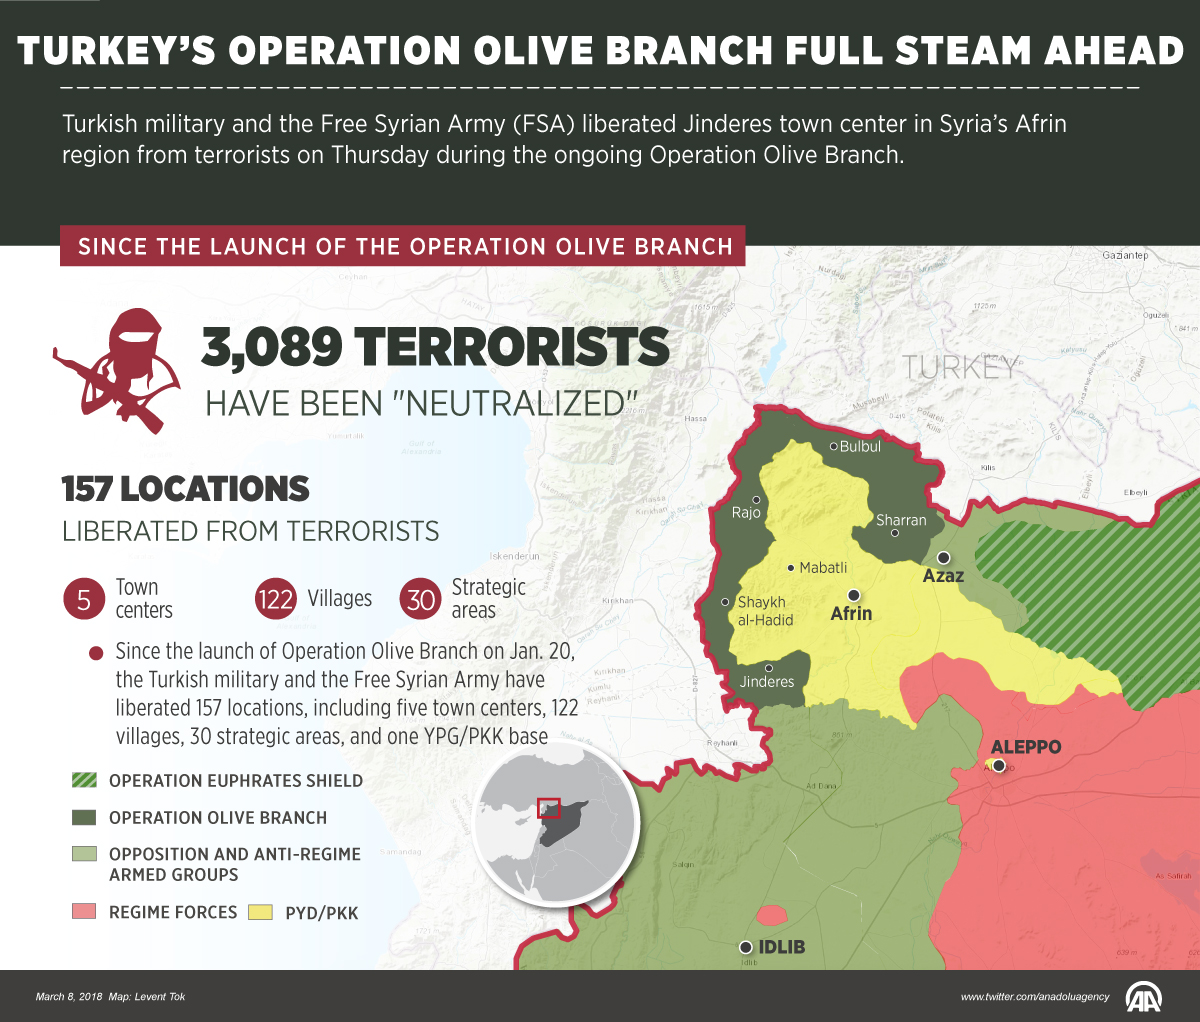 Turkey’s Operation Olive Branch full steam ahead